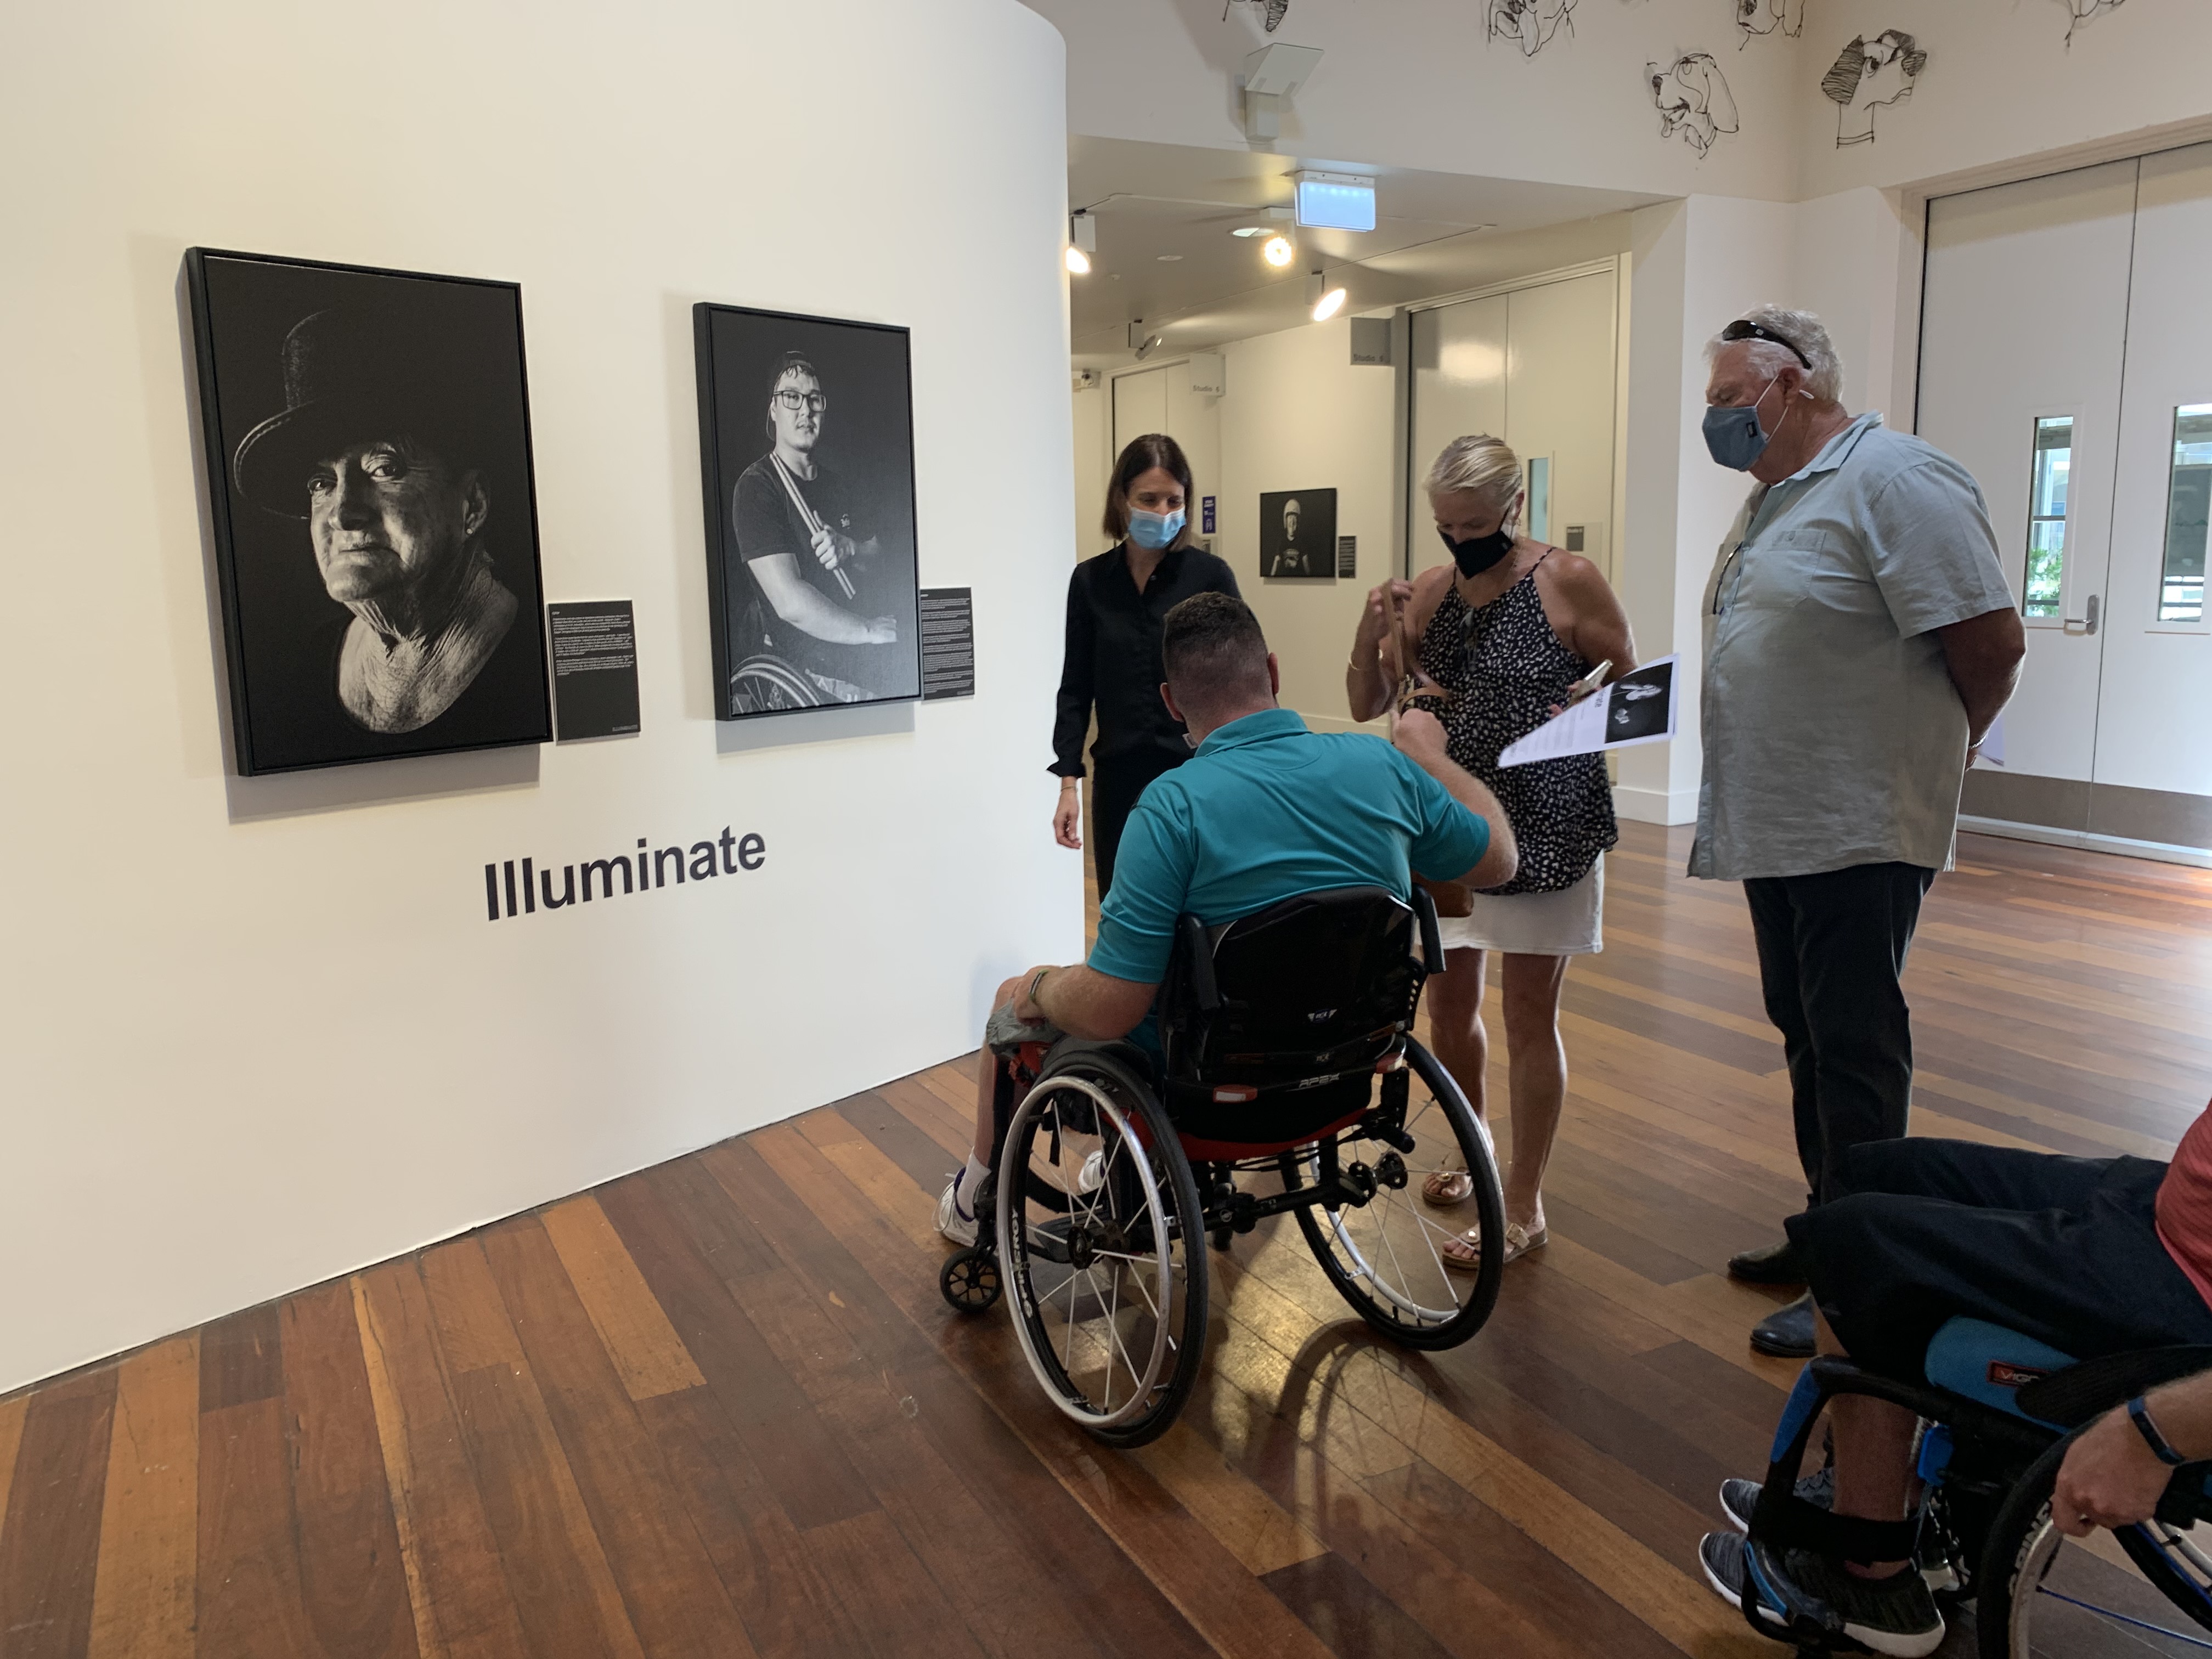 Art gallery displaying black and white portraits with several visitors observing. Two people are in wheelchairs. 